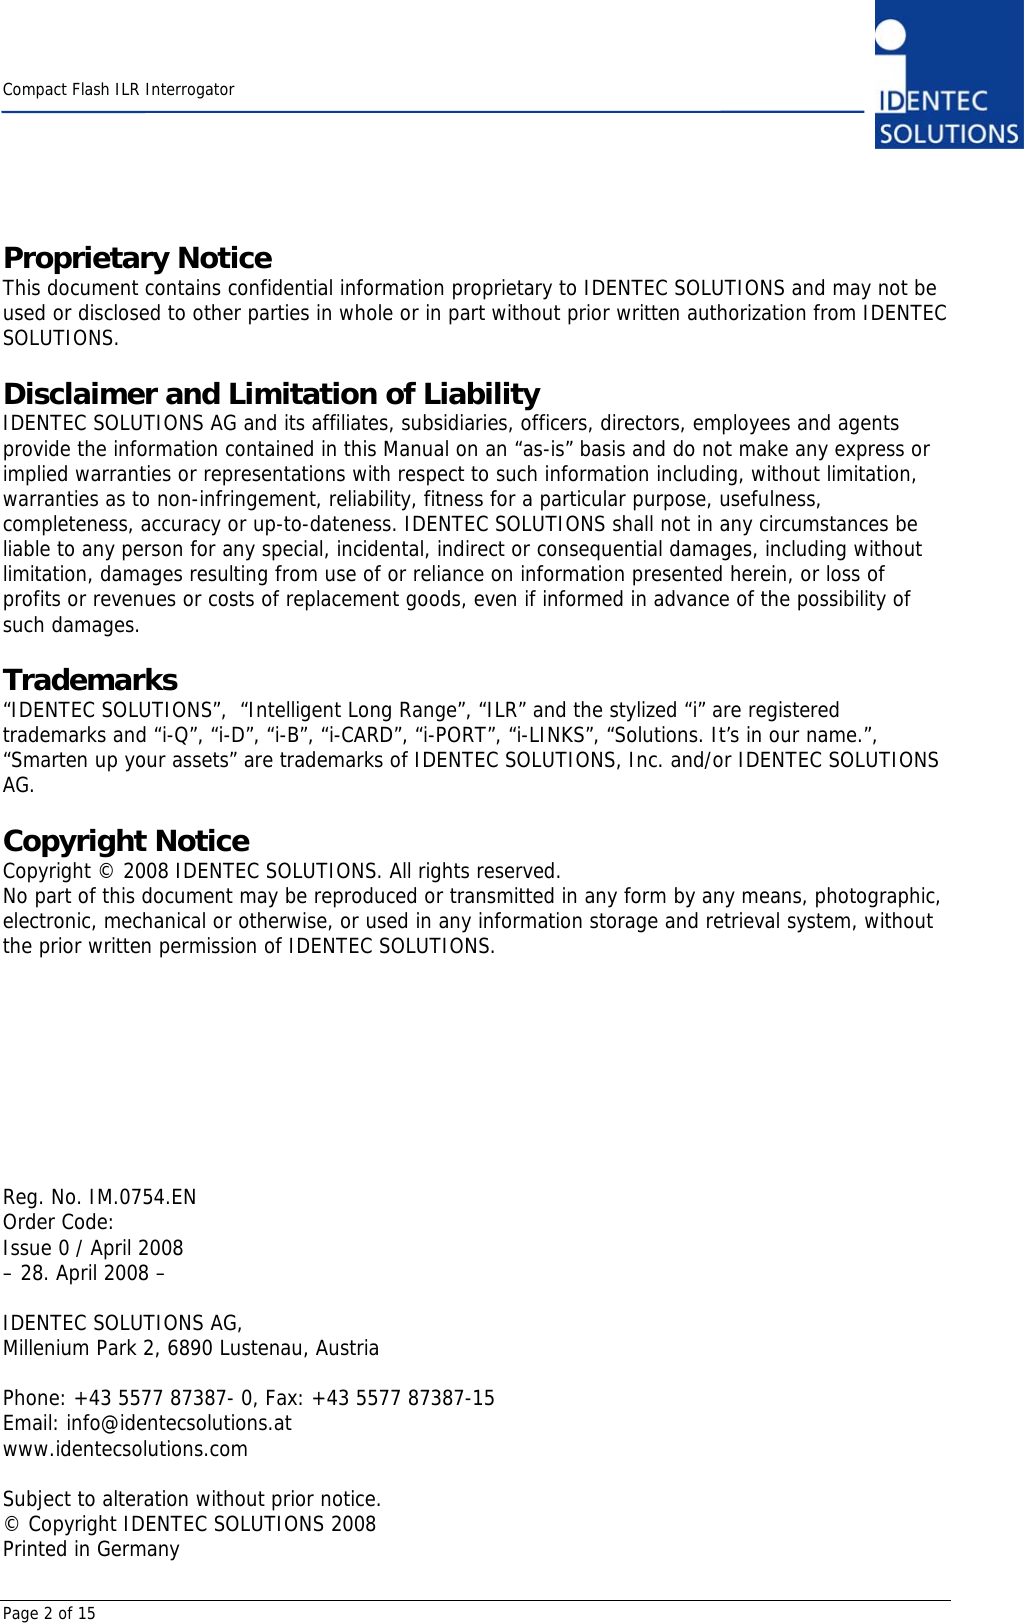    Compact Flash ILR Interrogator  Page 2 of 15 Proprietary Notice This document contains confidential information proprietary to IDENTEC SOLUTIONS and may not be used or disclosed to other parties in whole or in part without prior written authorization from IDENTEC SOLUTIONS.  Disclaimer and Limitation of Liability IDENTEC SOLUTIONS AG and its affiliates, subsidiaries, officers, directors, employees and agents provide the information contained in this Manual on an “as-is” basis and do not make any express or implied warranties or representations with respect to such information including, without limitation, warranties as to non-infringement, reliability, fitness for a particular purpose, usefulness, completeness, accuracy or up-to-dateness. IDENTEC SOLUTIONS shall not in any circumstances be liable to any person for any special, incidental, indirect or consequential damages, including without limitation, damages resulting from use of or reliance on information presented herein, or loss of profits or revenues or costs of replacement goods, even if informed in advance of the possibility of such damages.  Trademarks “IDENTEC SOLUTIONS”,  “Intelligent Long Range”, “ILR” and the stylized “i” are registered trademarks and “i-Q”, “i-D”, “i-B”, “i-CARD”, “i-PORT”, “i-LINKS”, “Solutions. It’s in our name.”, “Smarten up your assets” are trademarks of IDENTEC SOLUTIONS, Inc. and/or IDENTEC SOLUTIONS AG.  Copyright Notice Copyright © 2008 IDENTEC SOLUTIONS. All rights reserved. No part of this document may be reproduced or transmitted in any form by any means, photographic, electronic, mechanical or otherwise, or used in any information storage and retrieval system, without the prior written permission of IDENTEC SOLUTIONS.          Reg. No. IM.0754.EN Order Code: Issue 0 / April 2008 – 28. April 2008 –  IDENTEC SOLUTIONS AG,  Millenium Park 2, 6890 Lustenau, Austria  Phone: +43 5577 87387- 0, Fax: +43 5577 87387-15 Email: info@identecsolutions.at www.identecsolutions.com  Subject to alteration without prior notice. © Copyright IDENTEC SOLUTIONS 2008 Printed in Germany 